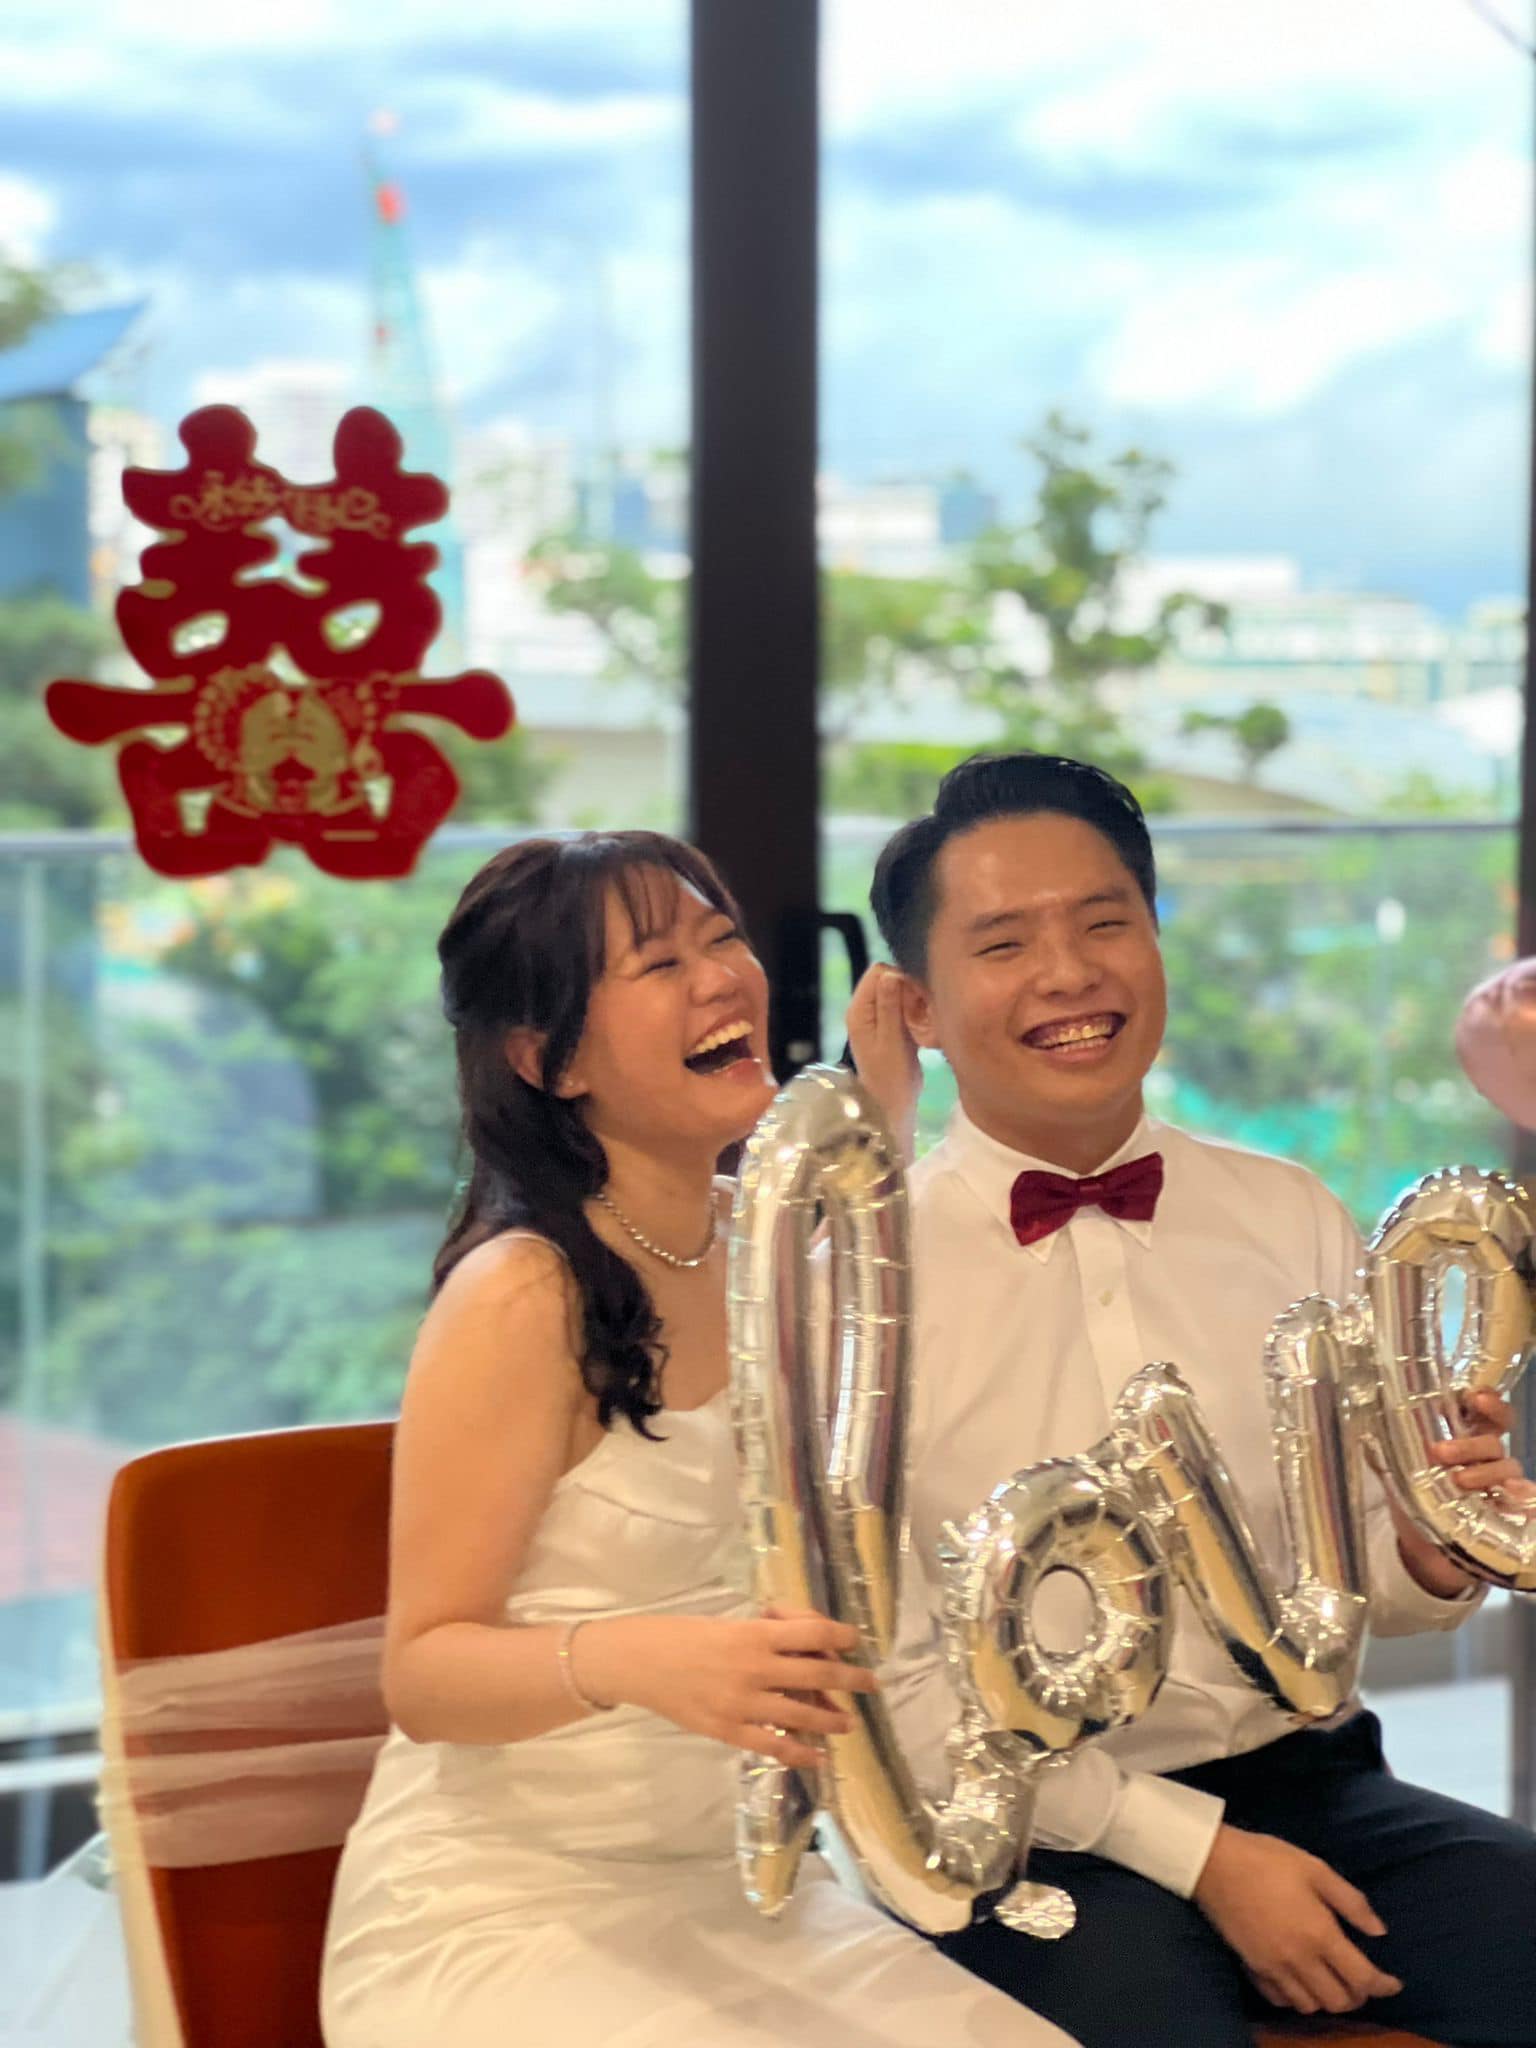 Phoebe and her husband, Marcus, held their wedding tea ceremony at her father's hospice. Image credit: Ambulance Wish Singapore